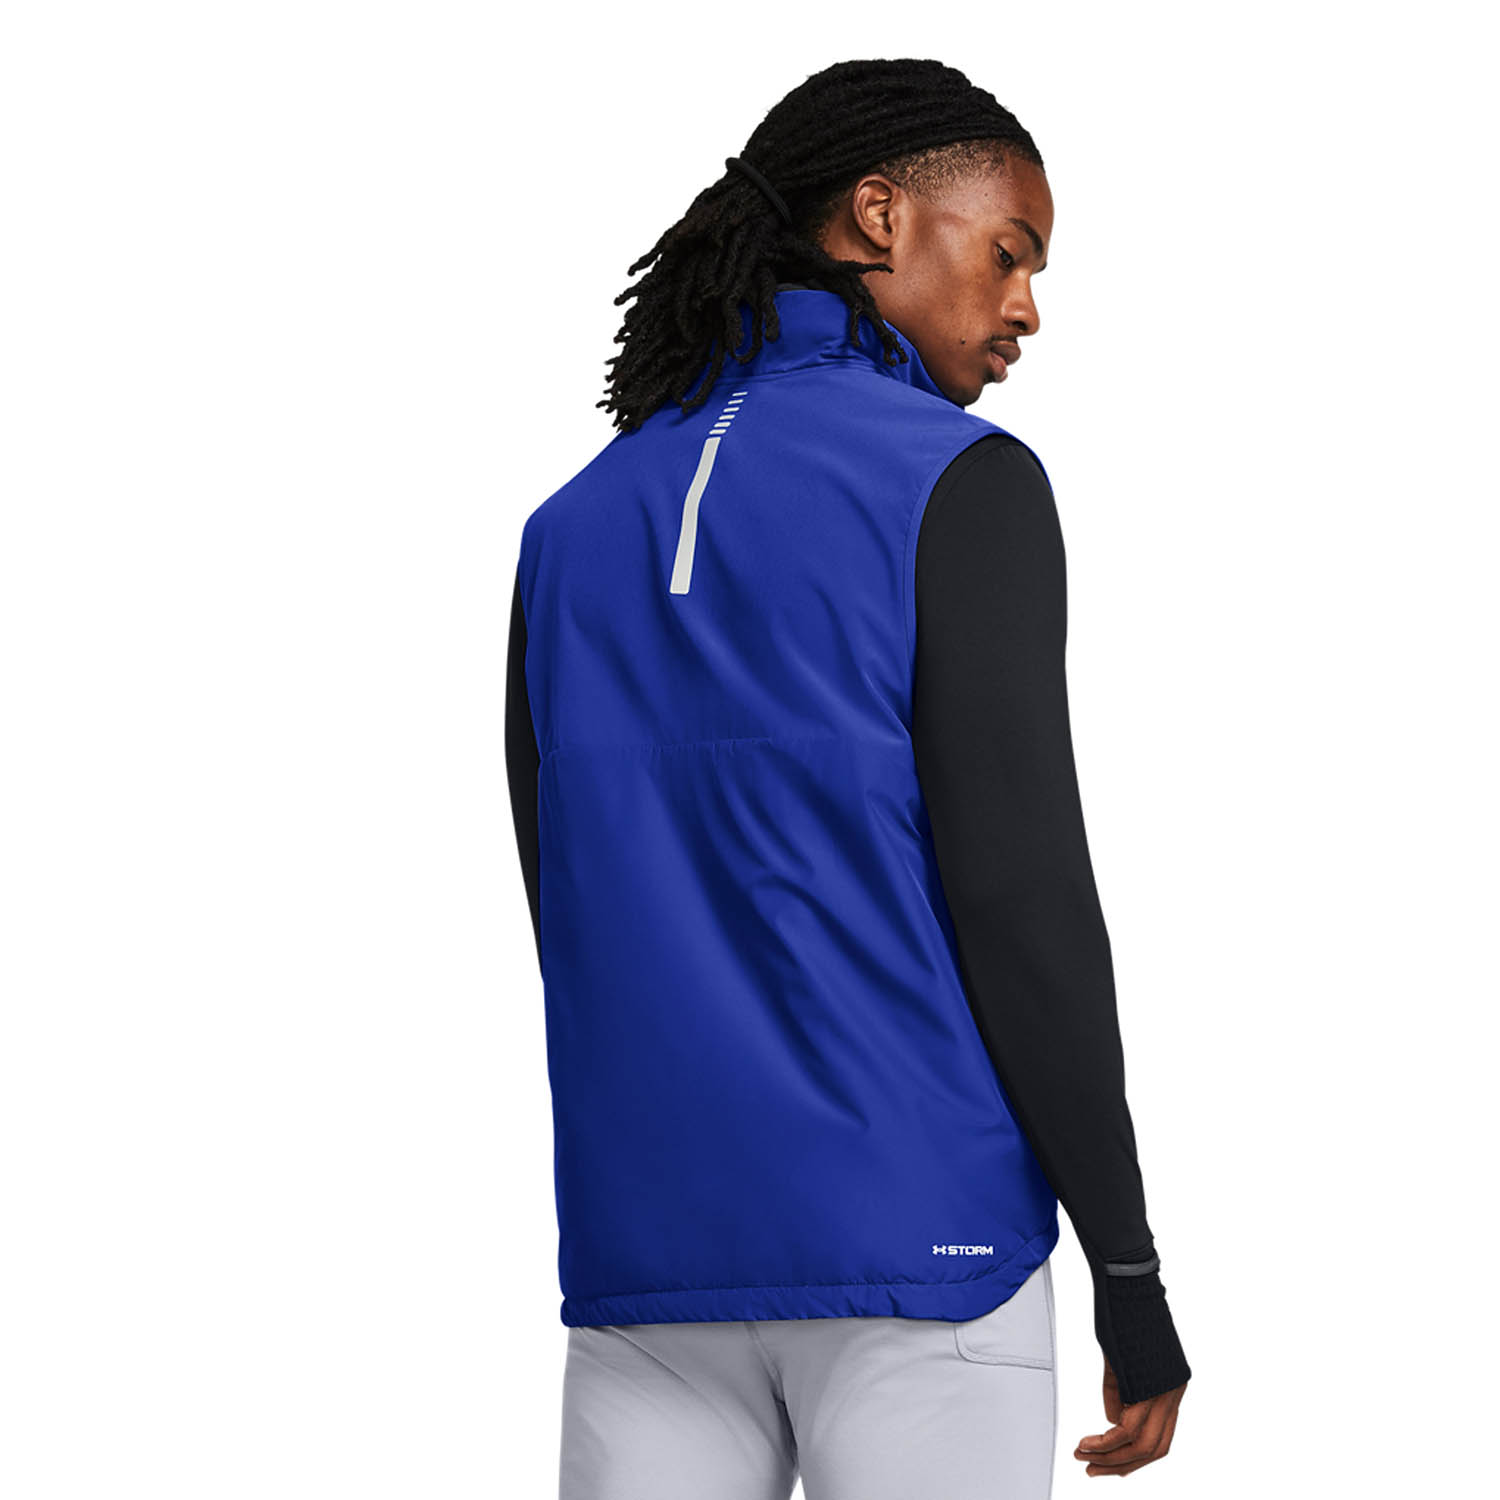 Under Armour Storm Session Run Chaleco - Team Royal